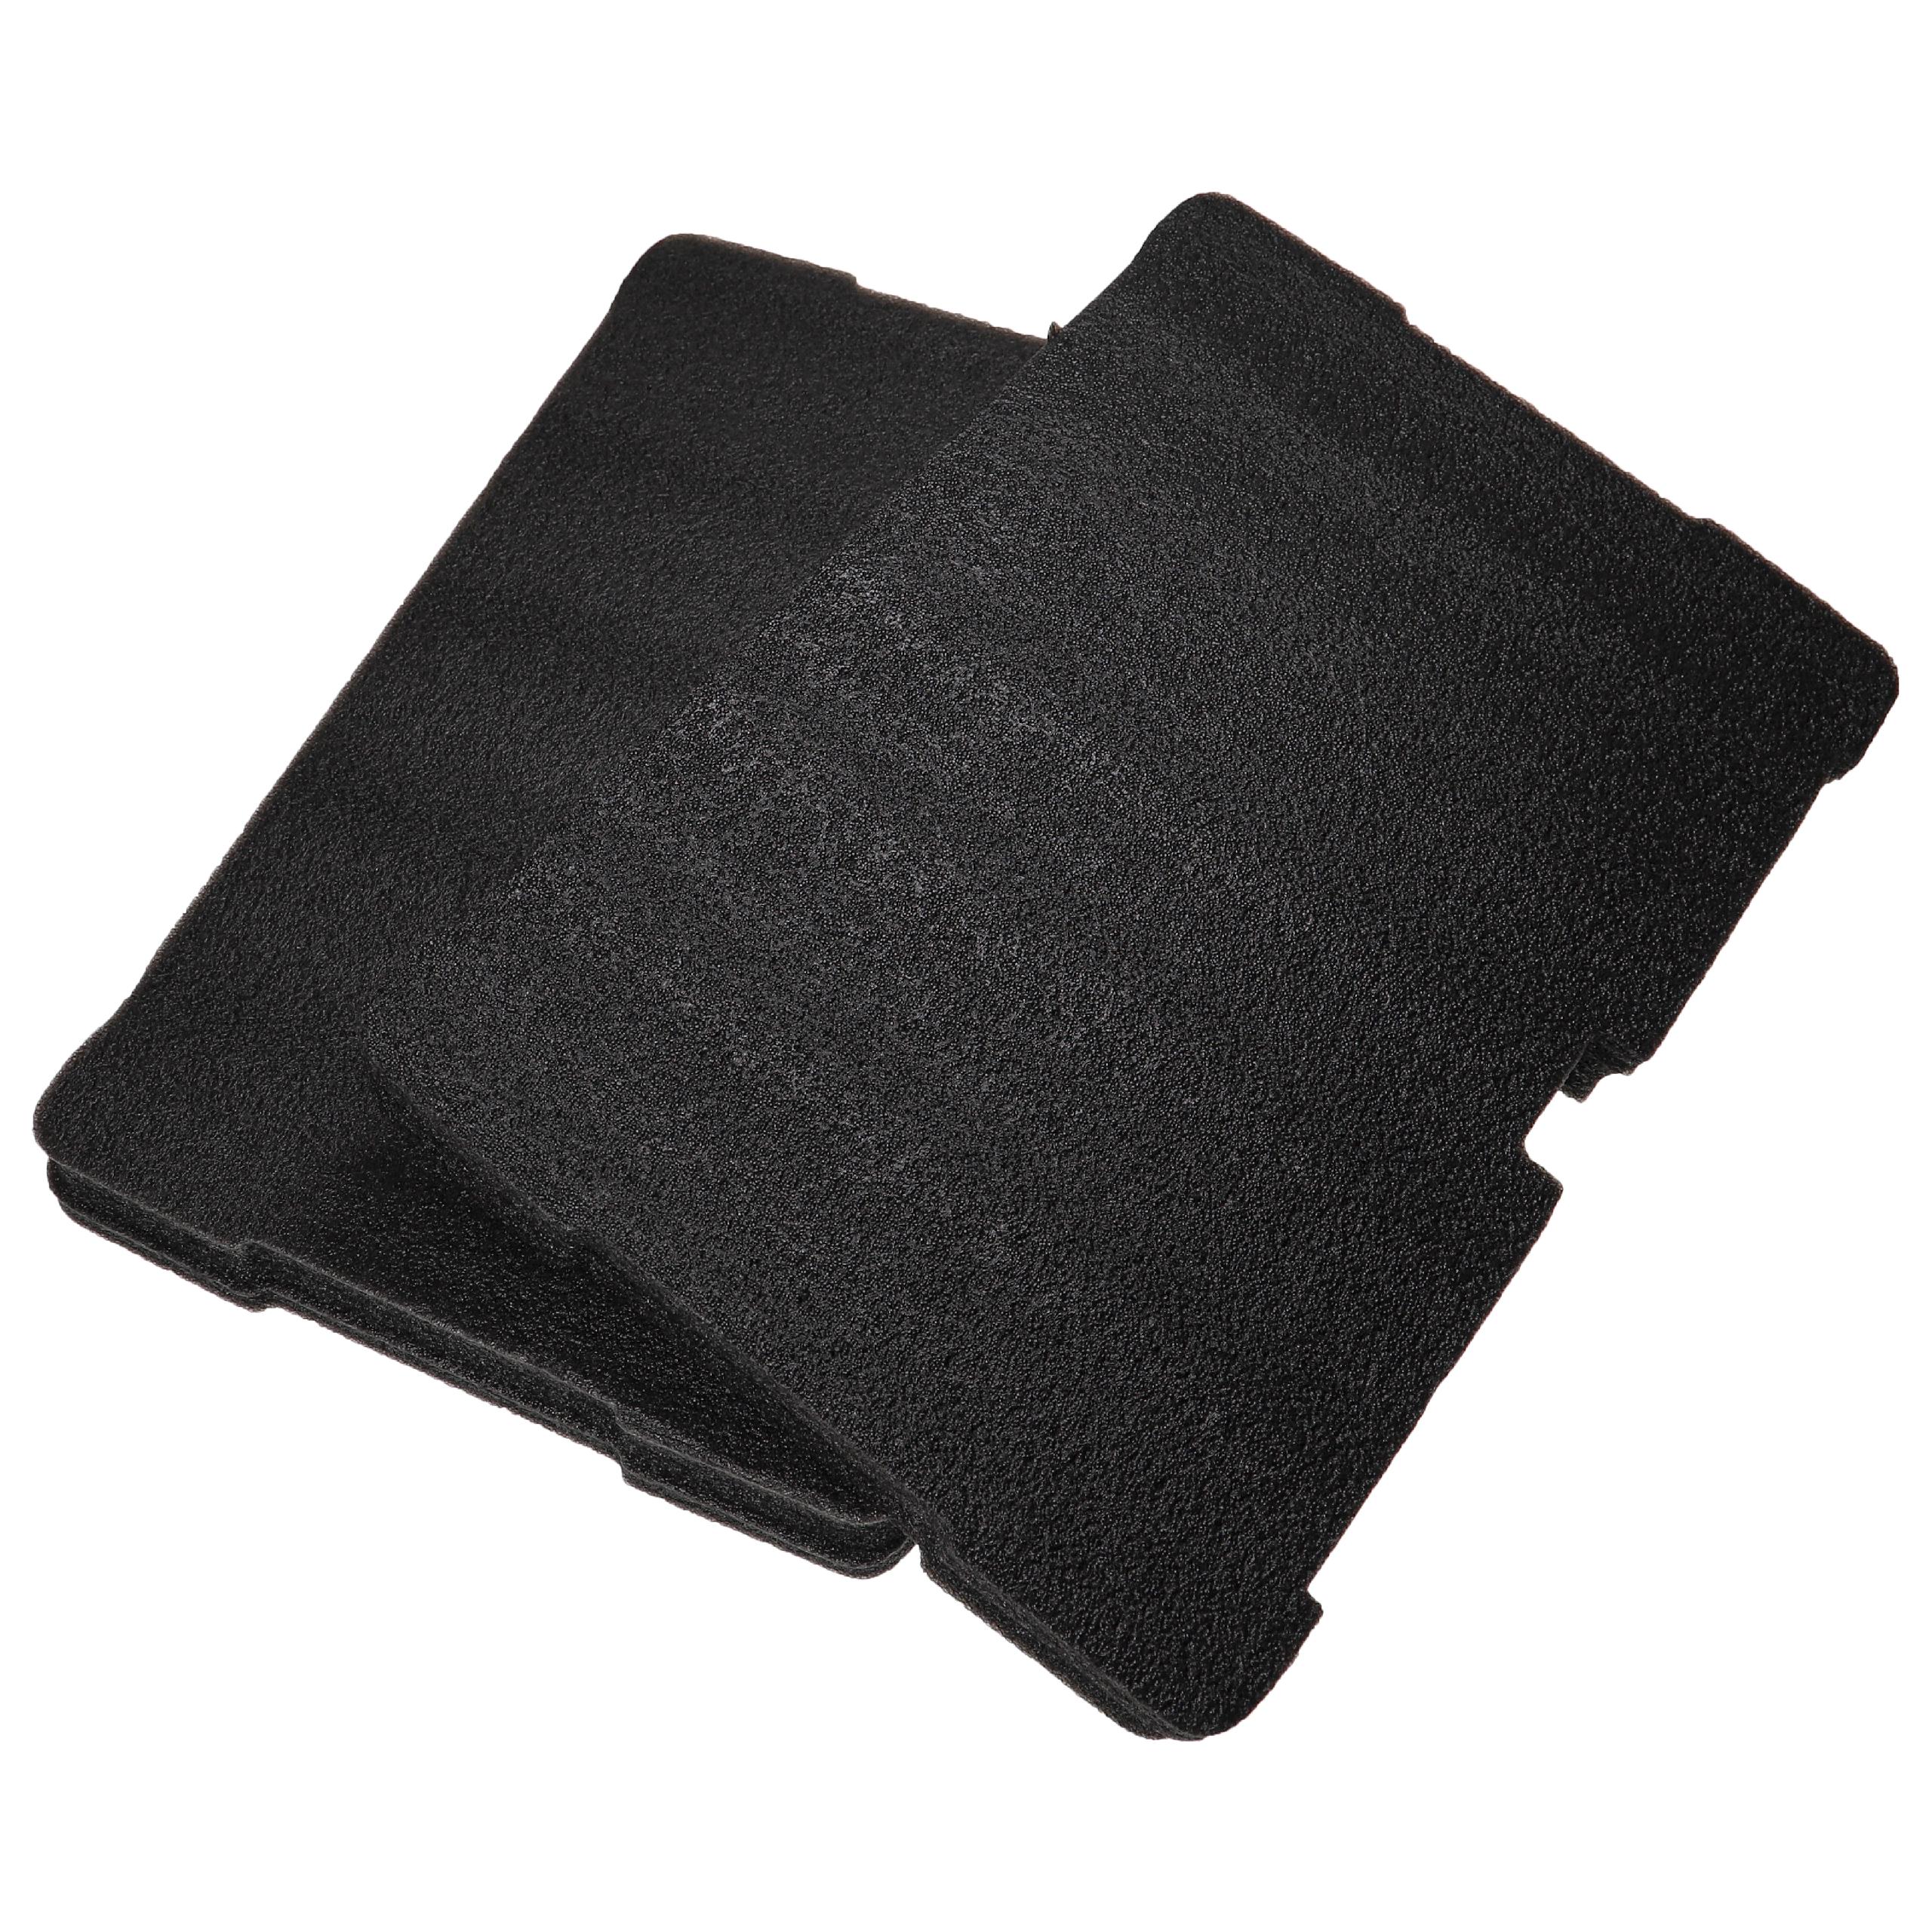 vhbw Foam Insert Replacement for Milwaukee 4932471428 for Toolbox - Foam Black